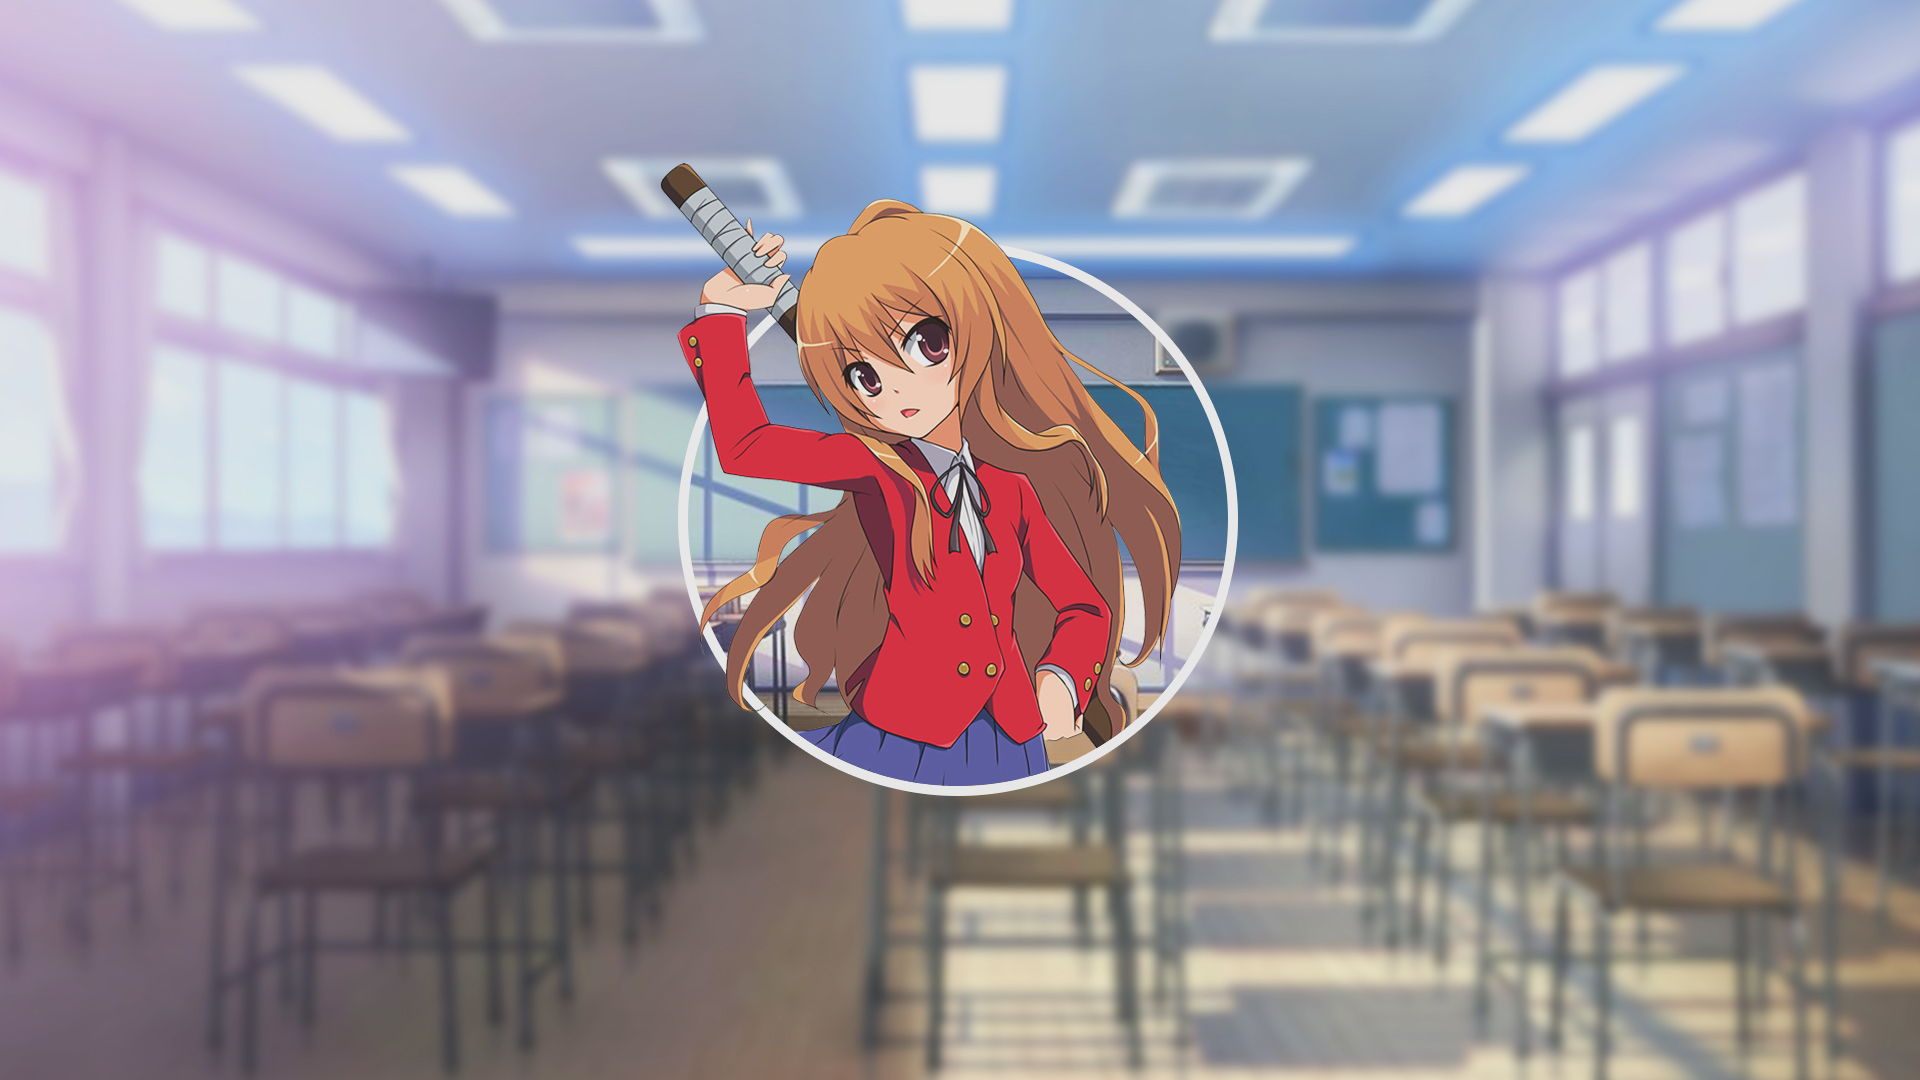 Anime 1920x1080 Toradora! anime anime girls picture-in-picture